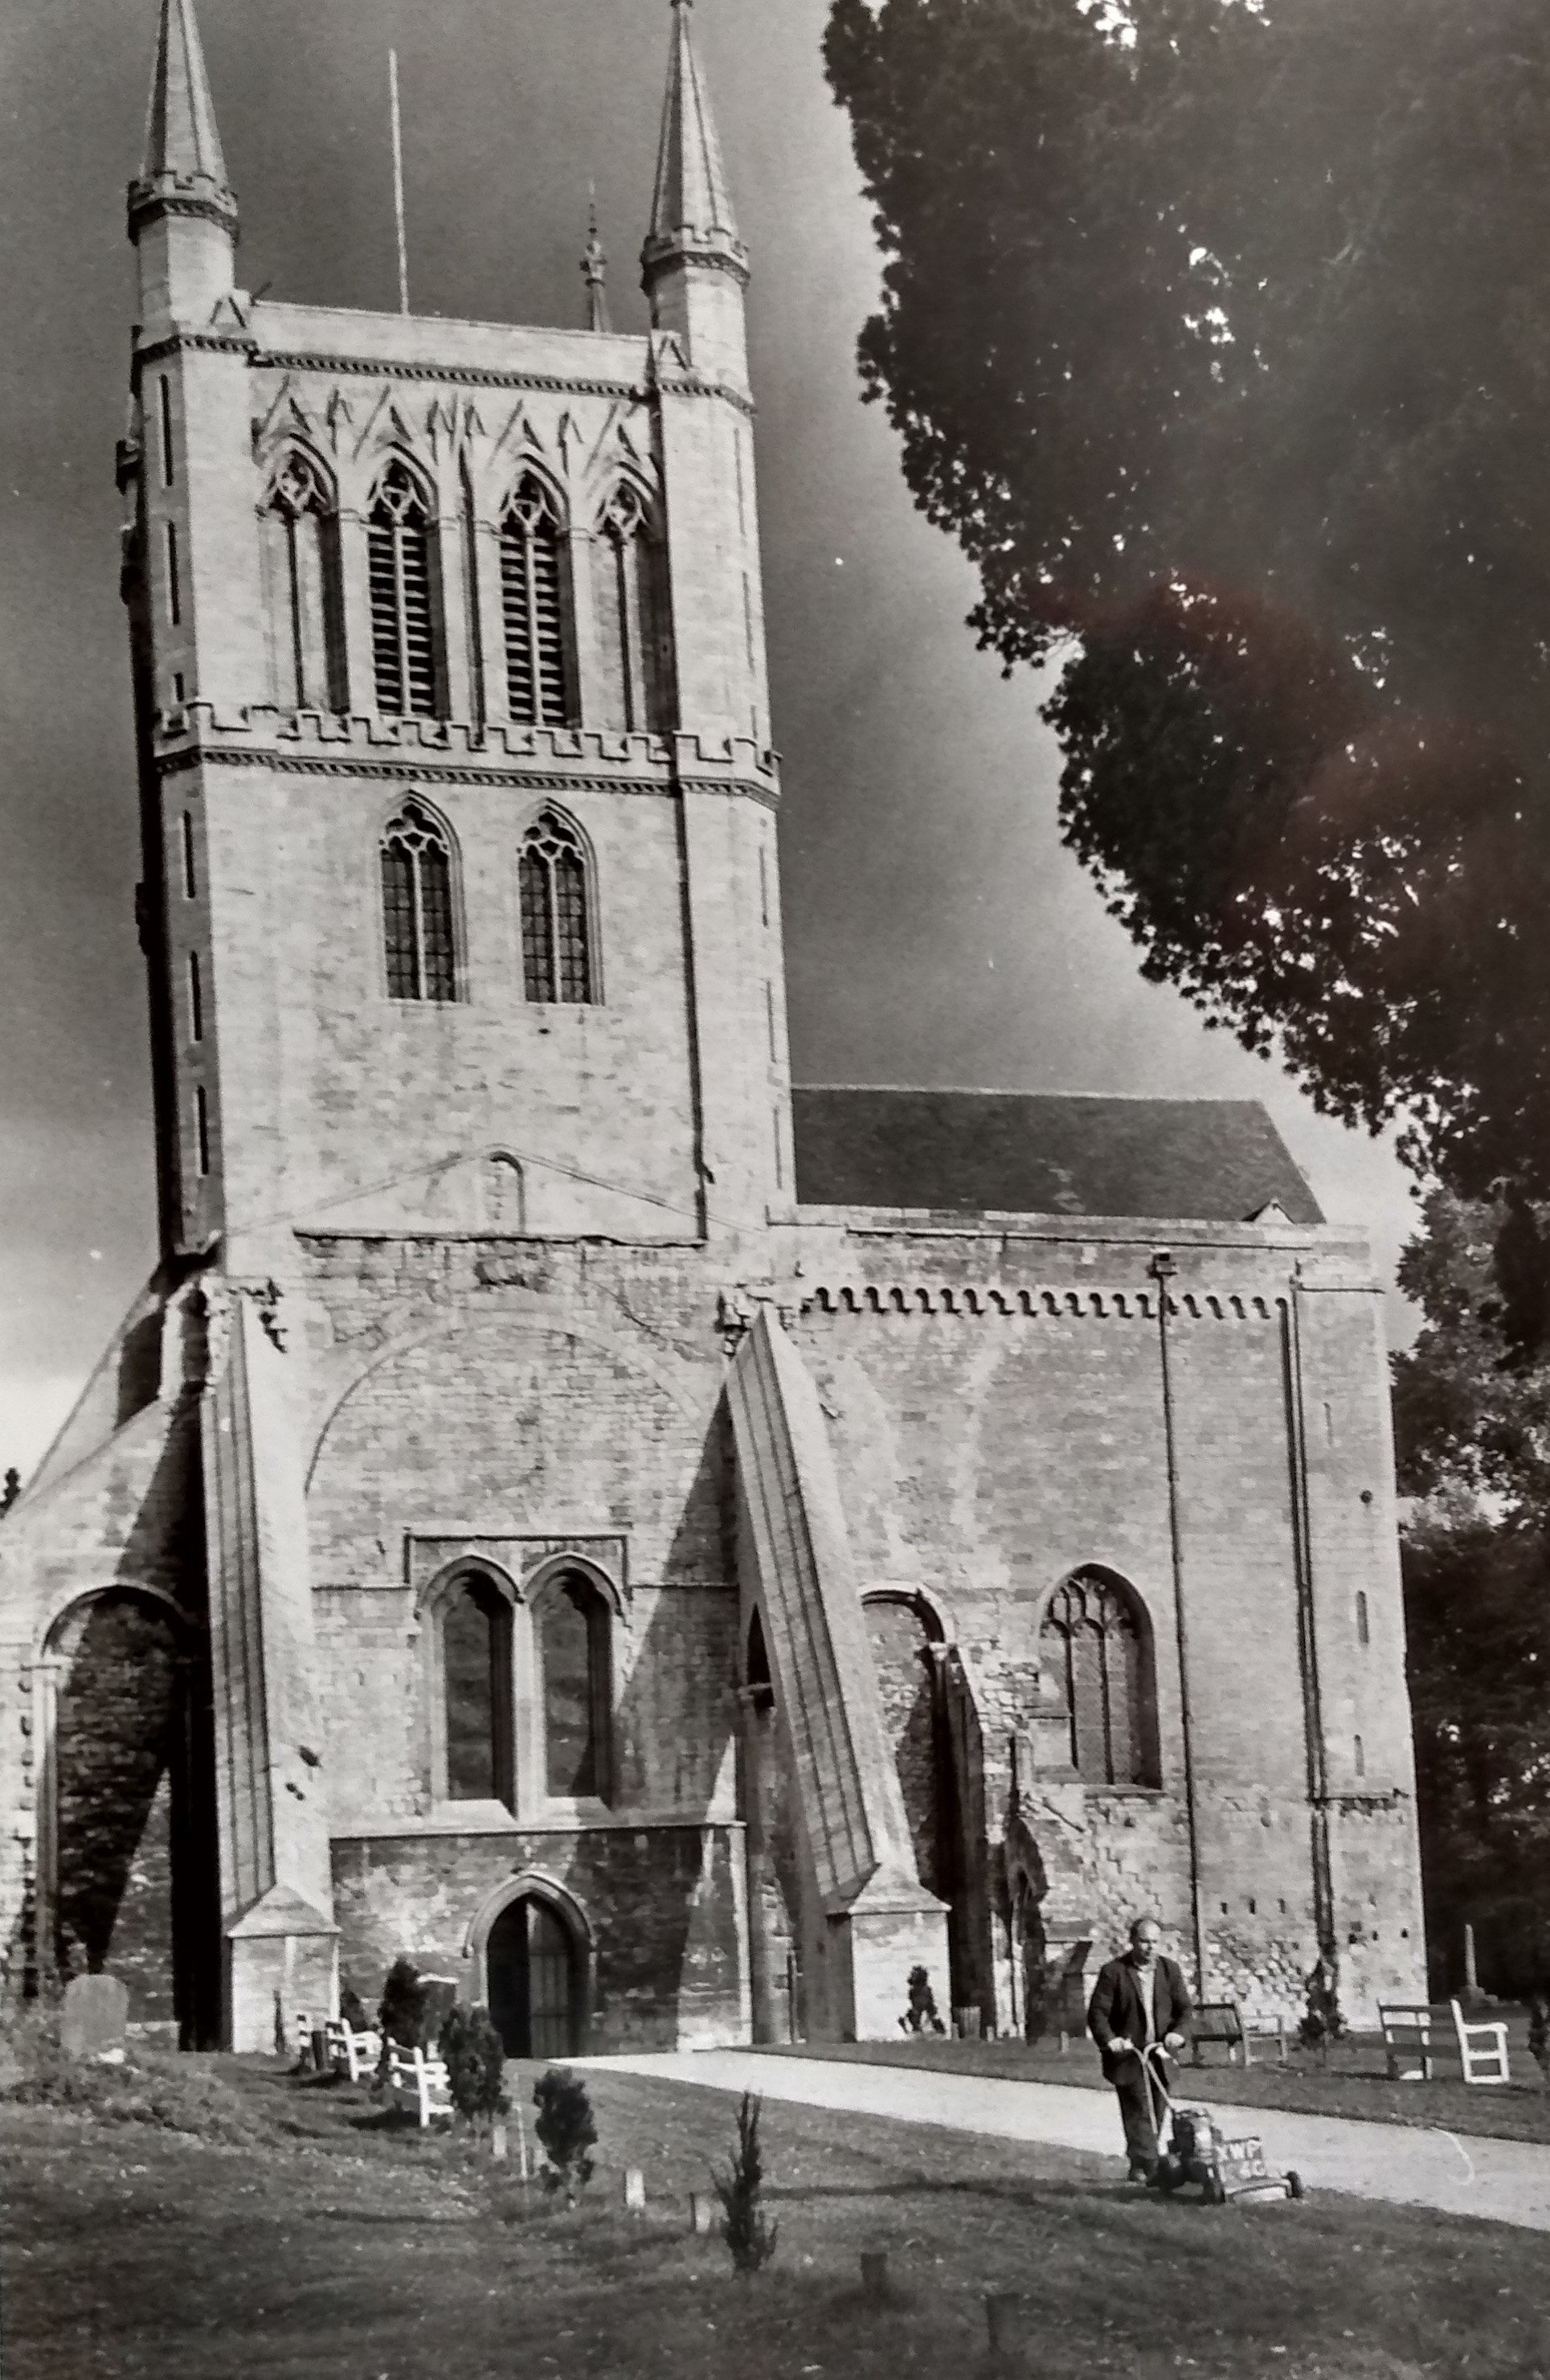 Mowing the verges in this eye-catching portrait of Pershore Abbey, sadly undated